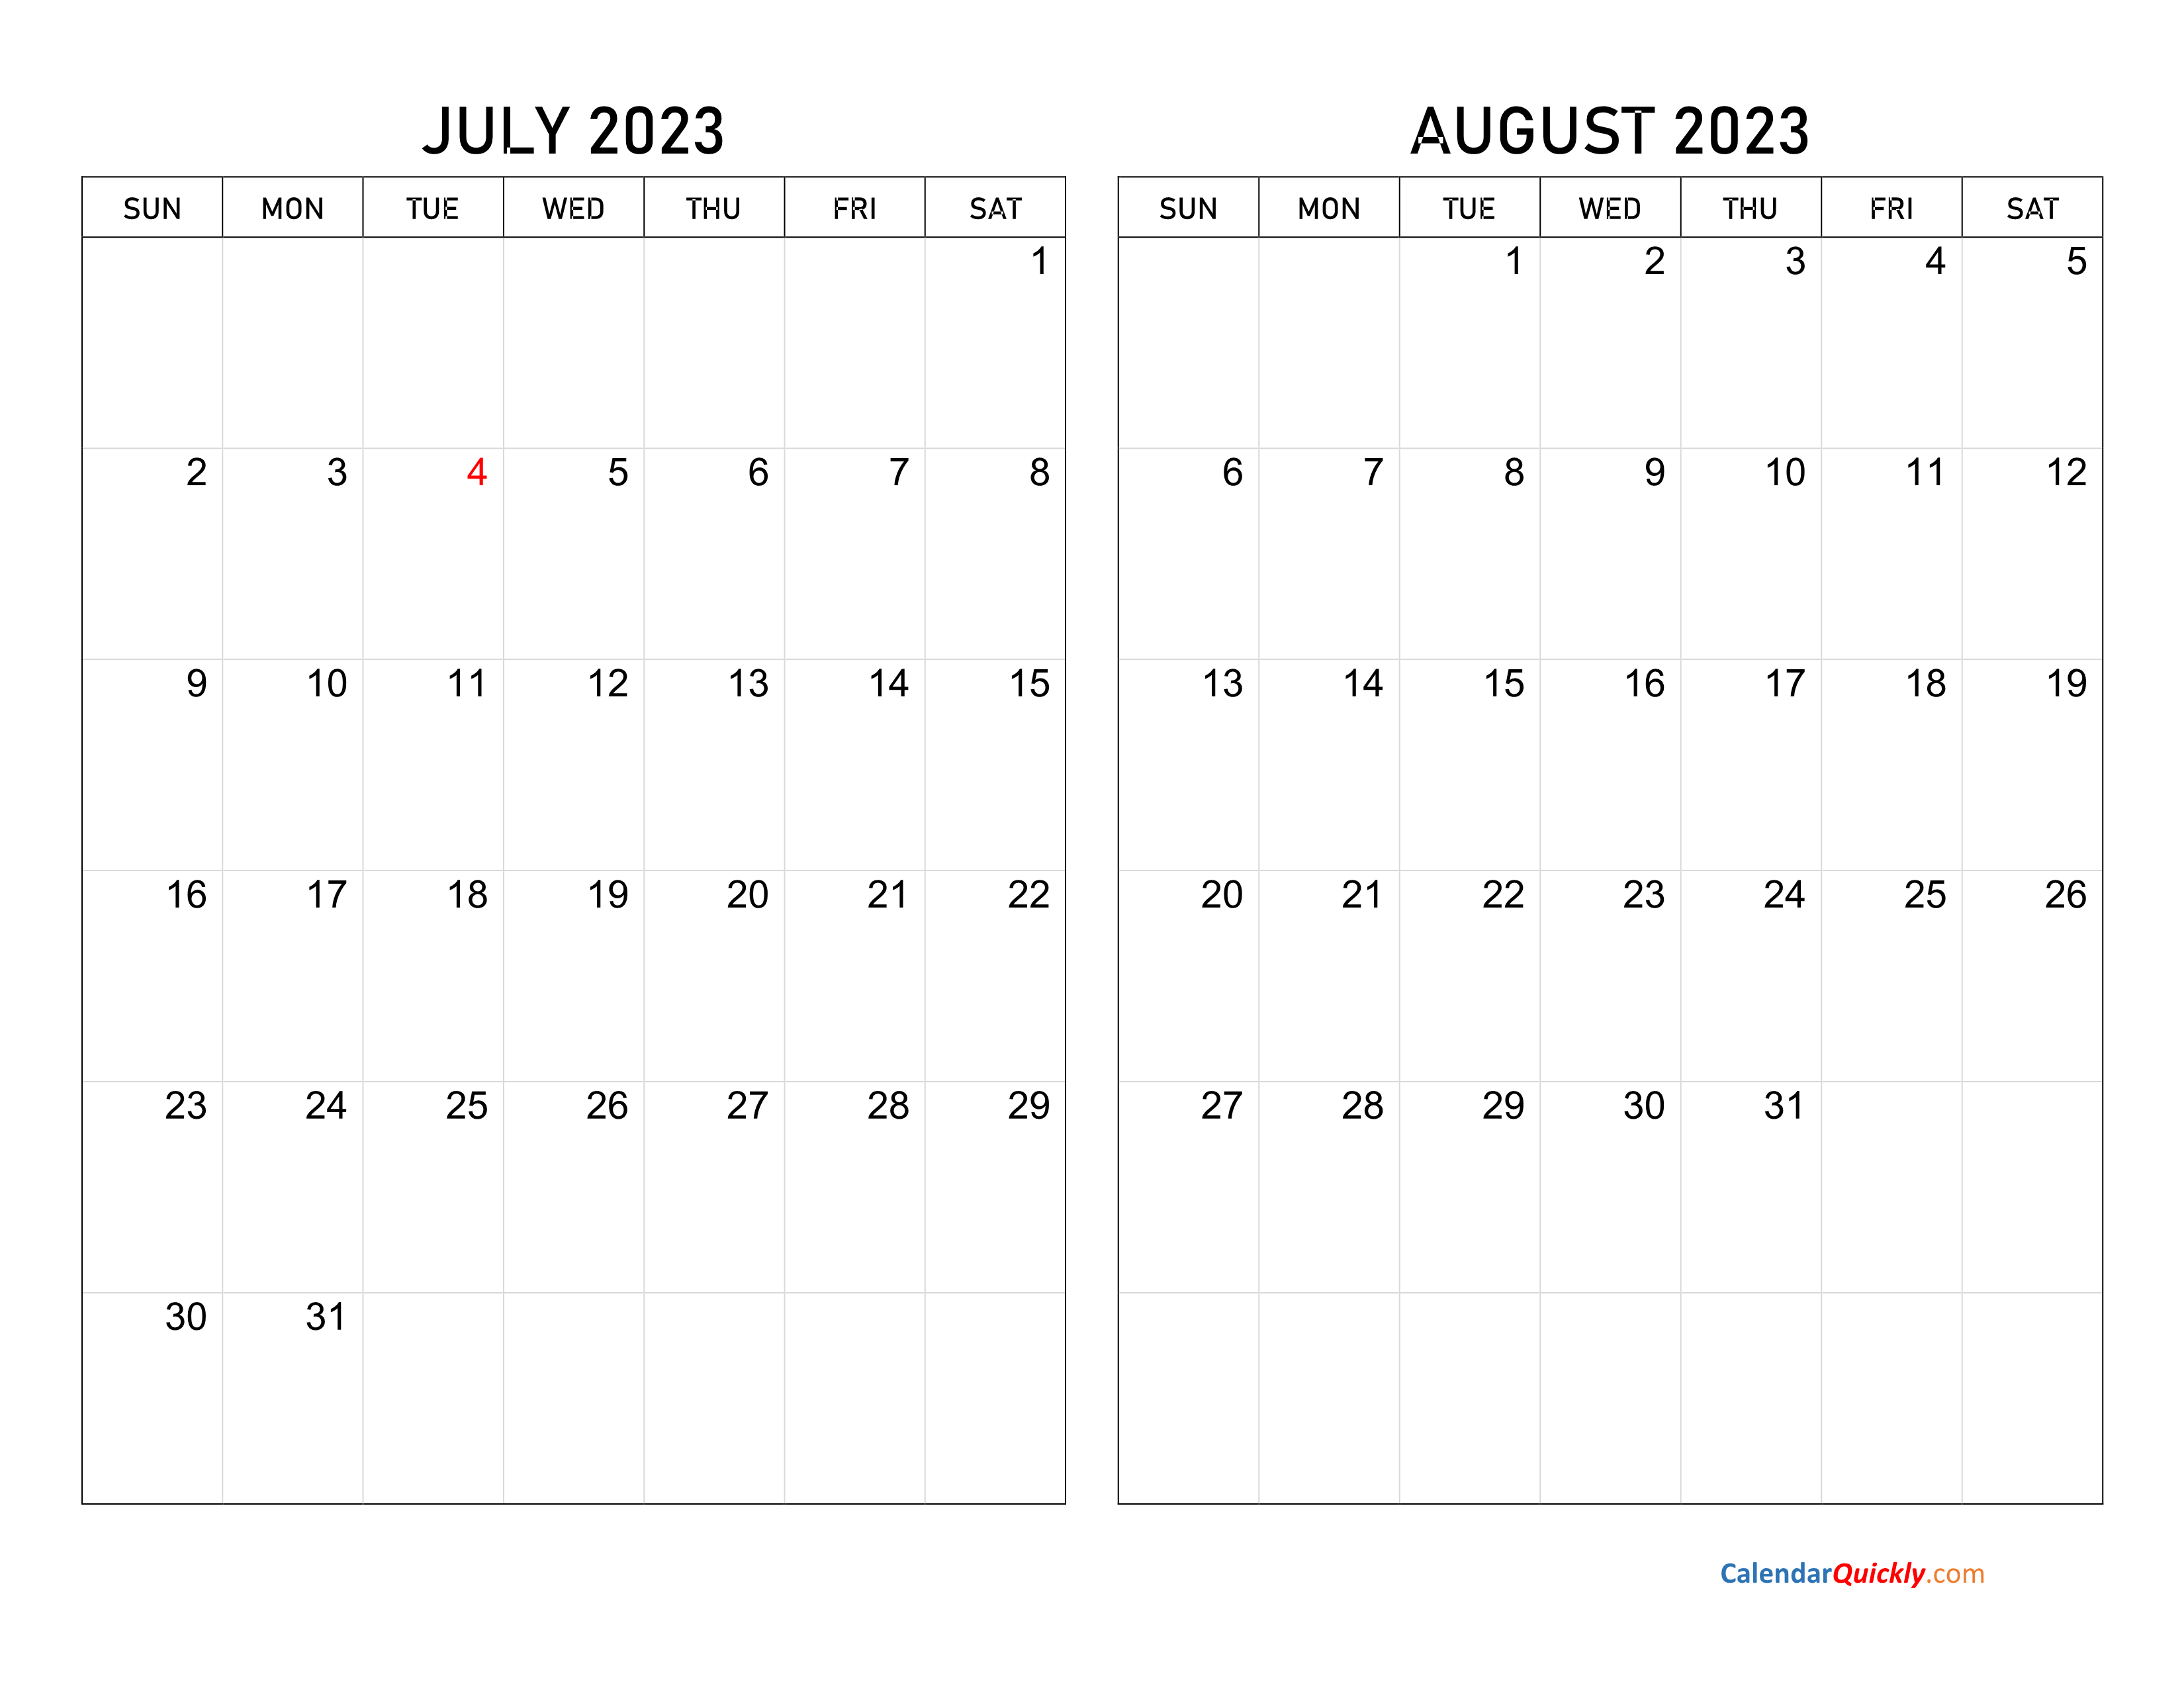 July and August 2023 Calendar | Calendar Quickly